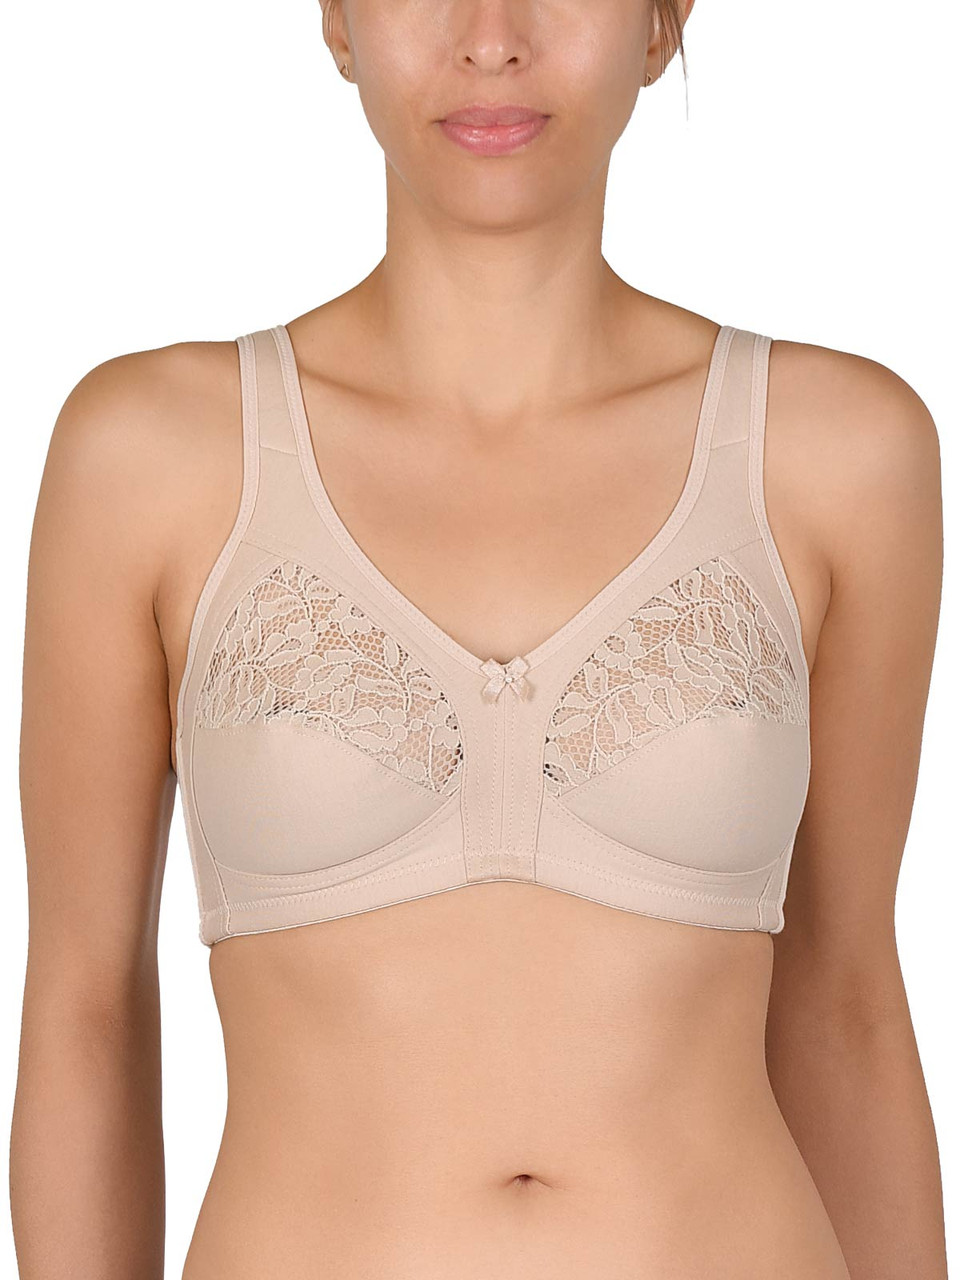 Organic Full Cup Wirefree Bra in Marigold by NICO – New Classics